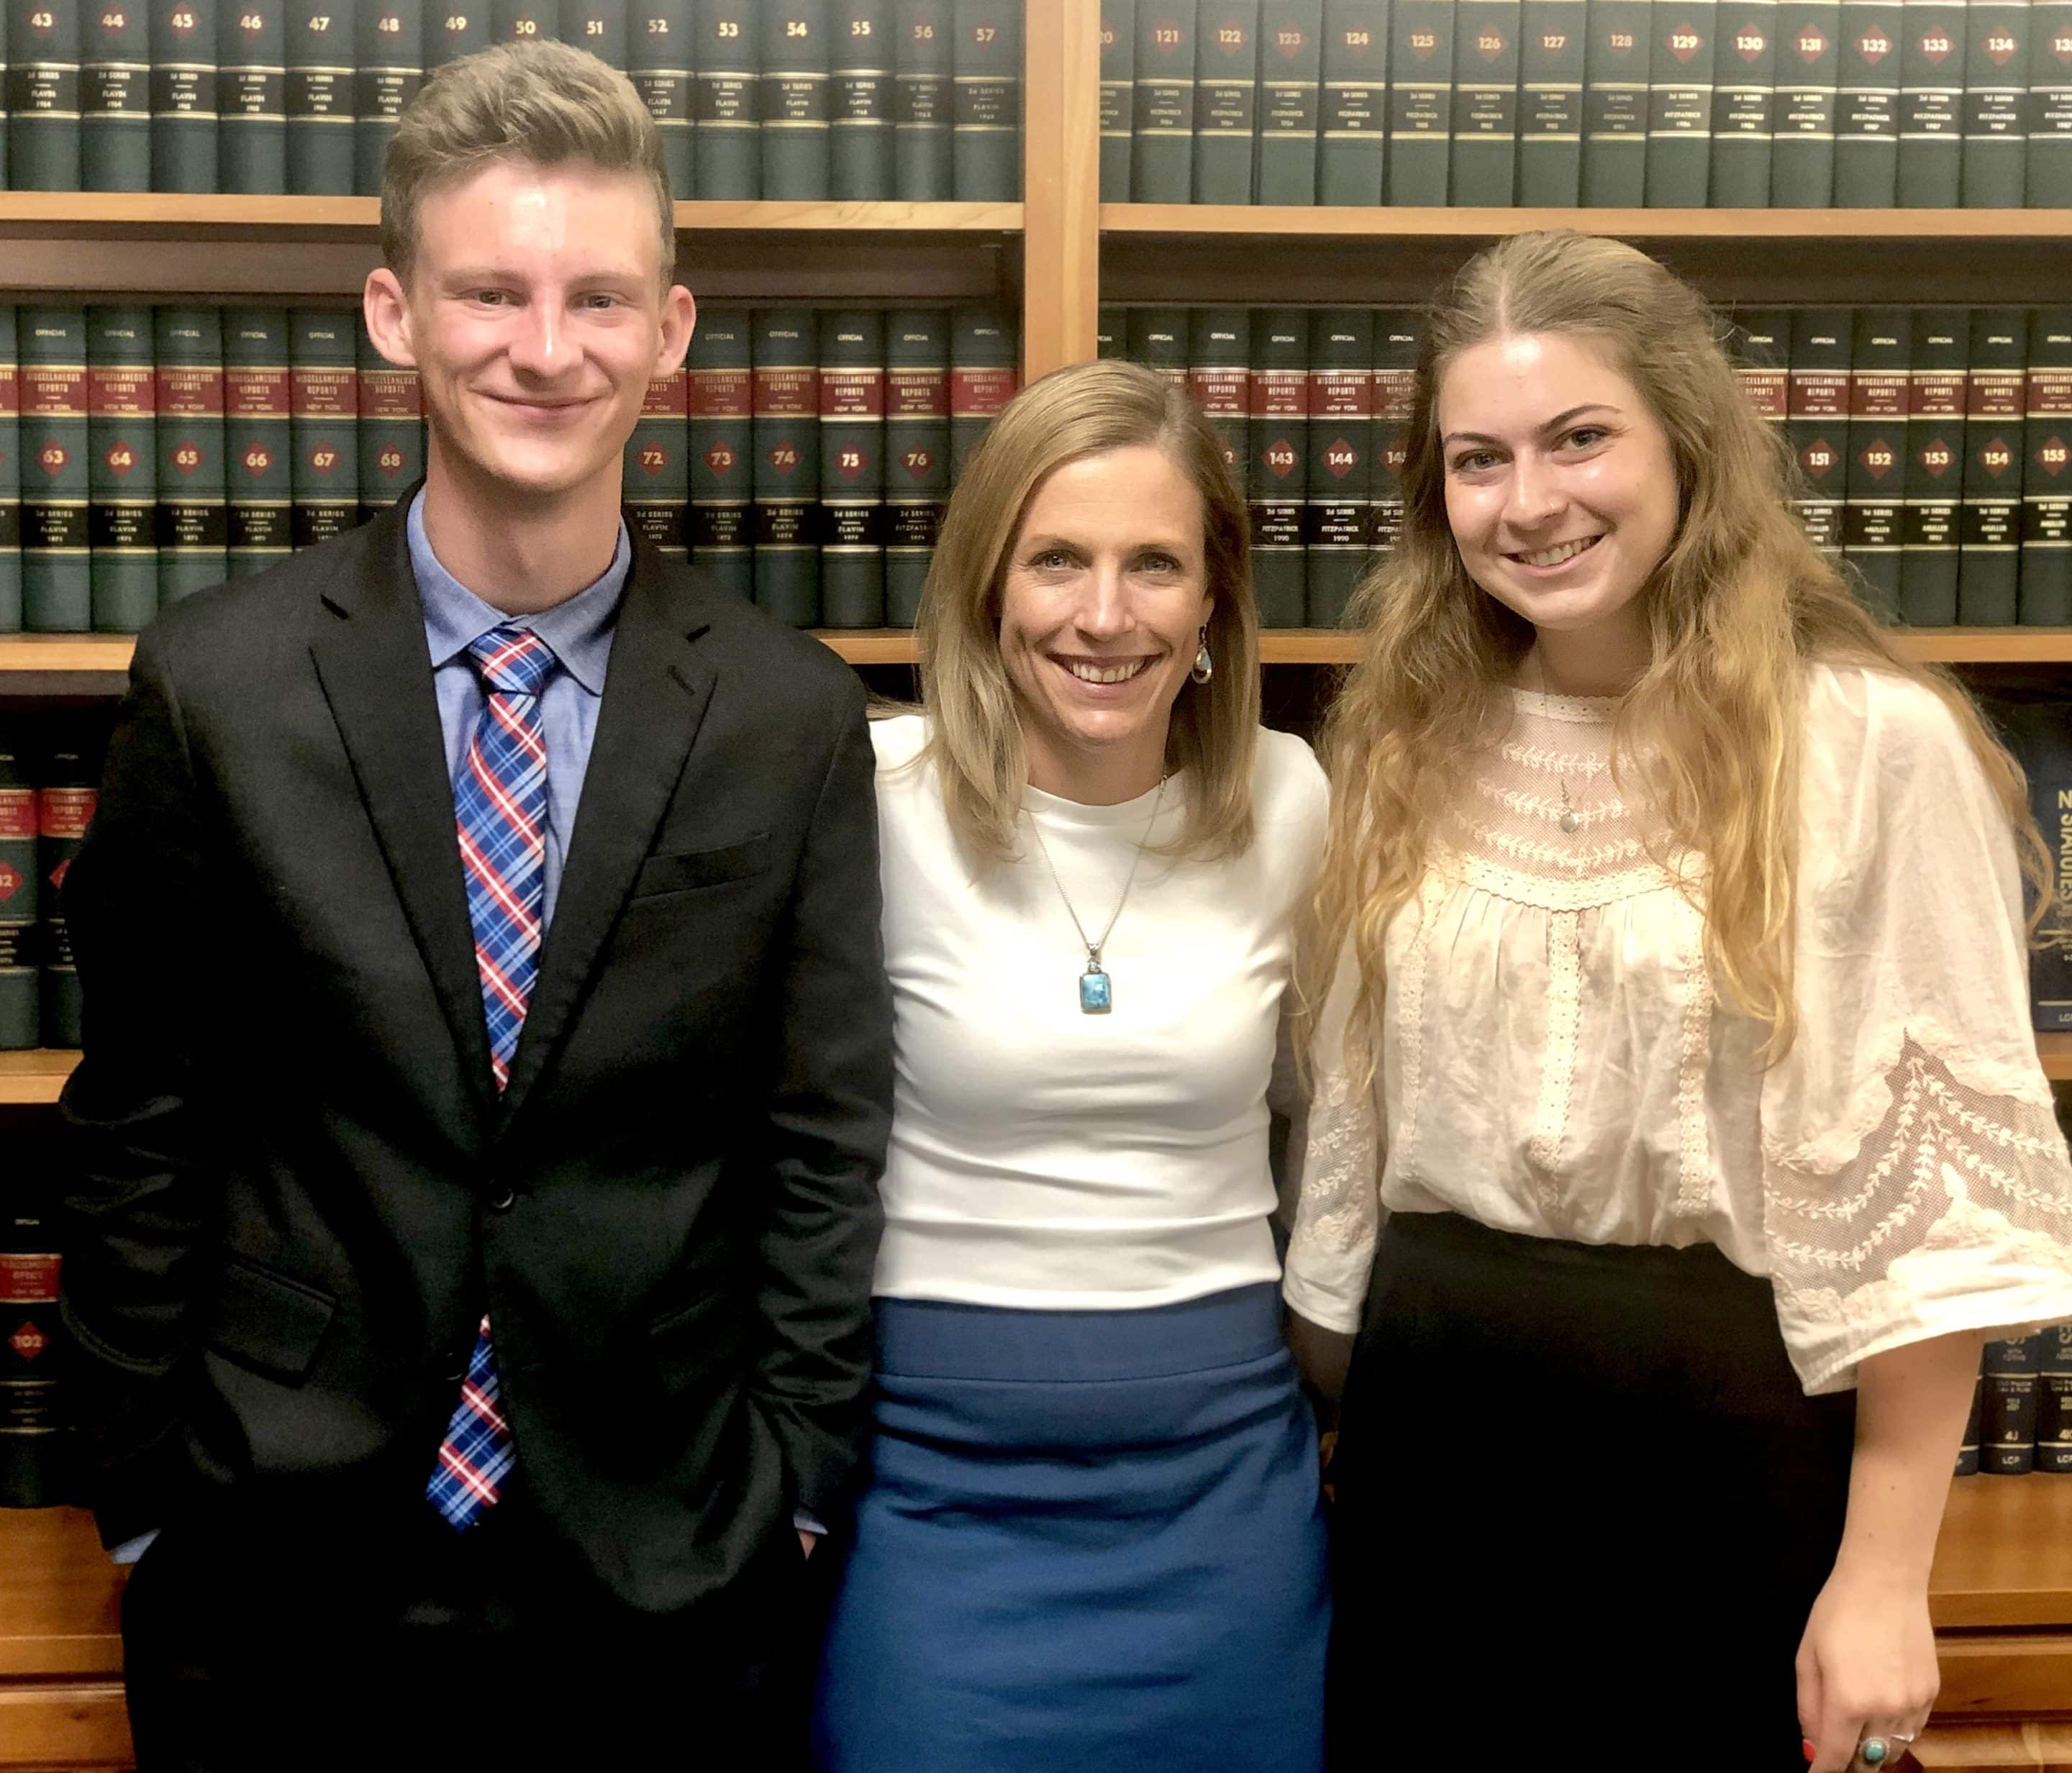 Christina and interns - Meet Our Future Legal Eagles: Summer Interns Eyeing Law School After Working With Christina Sonsire